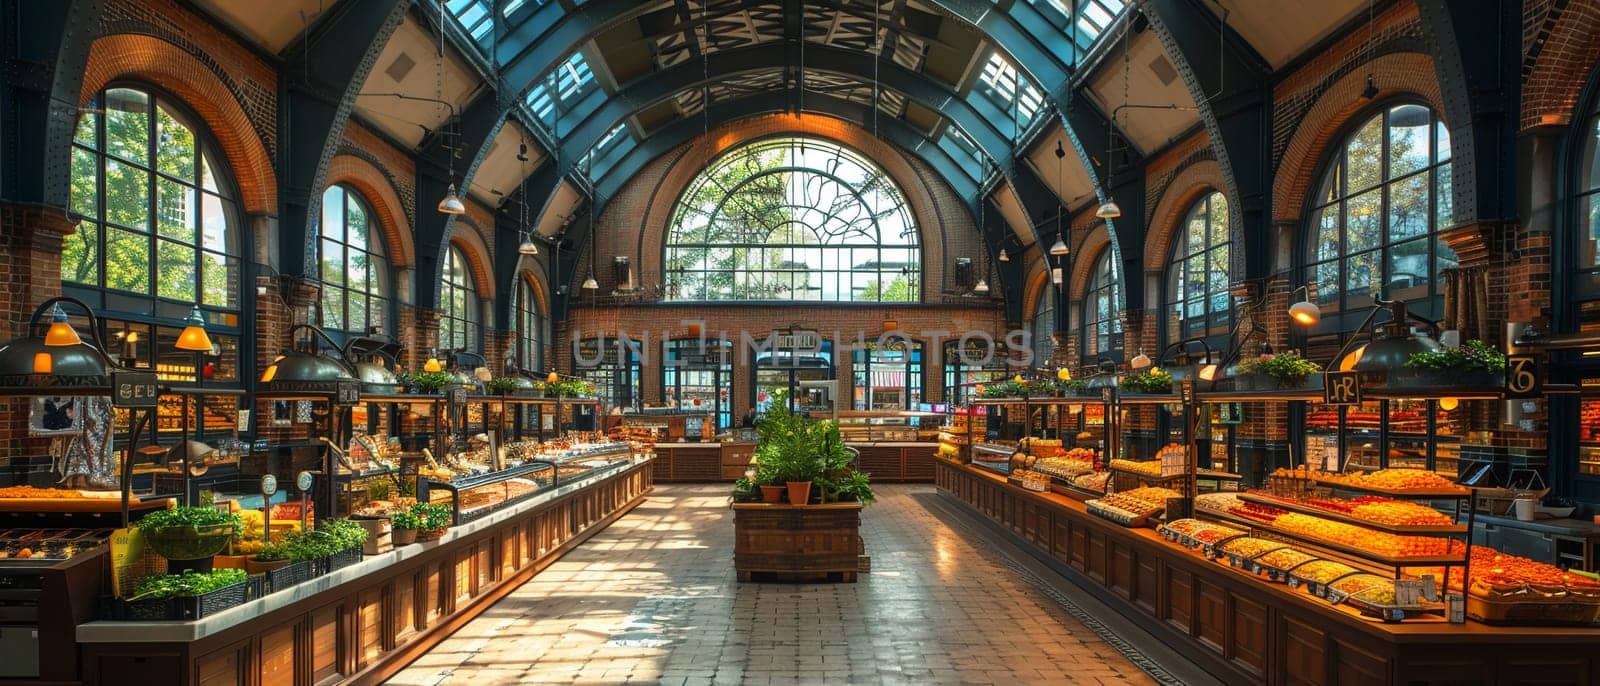 Historic train station converted into a public market by Benzoix